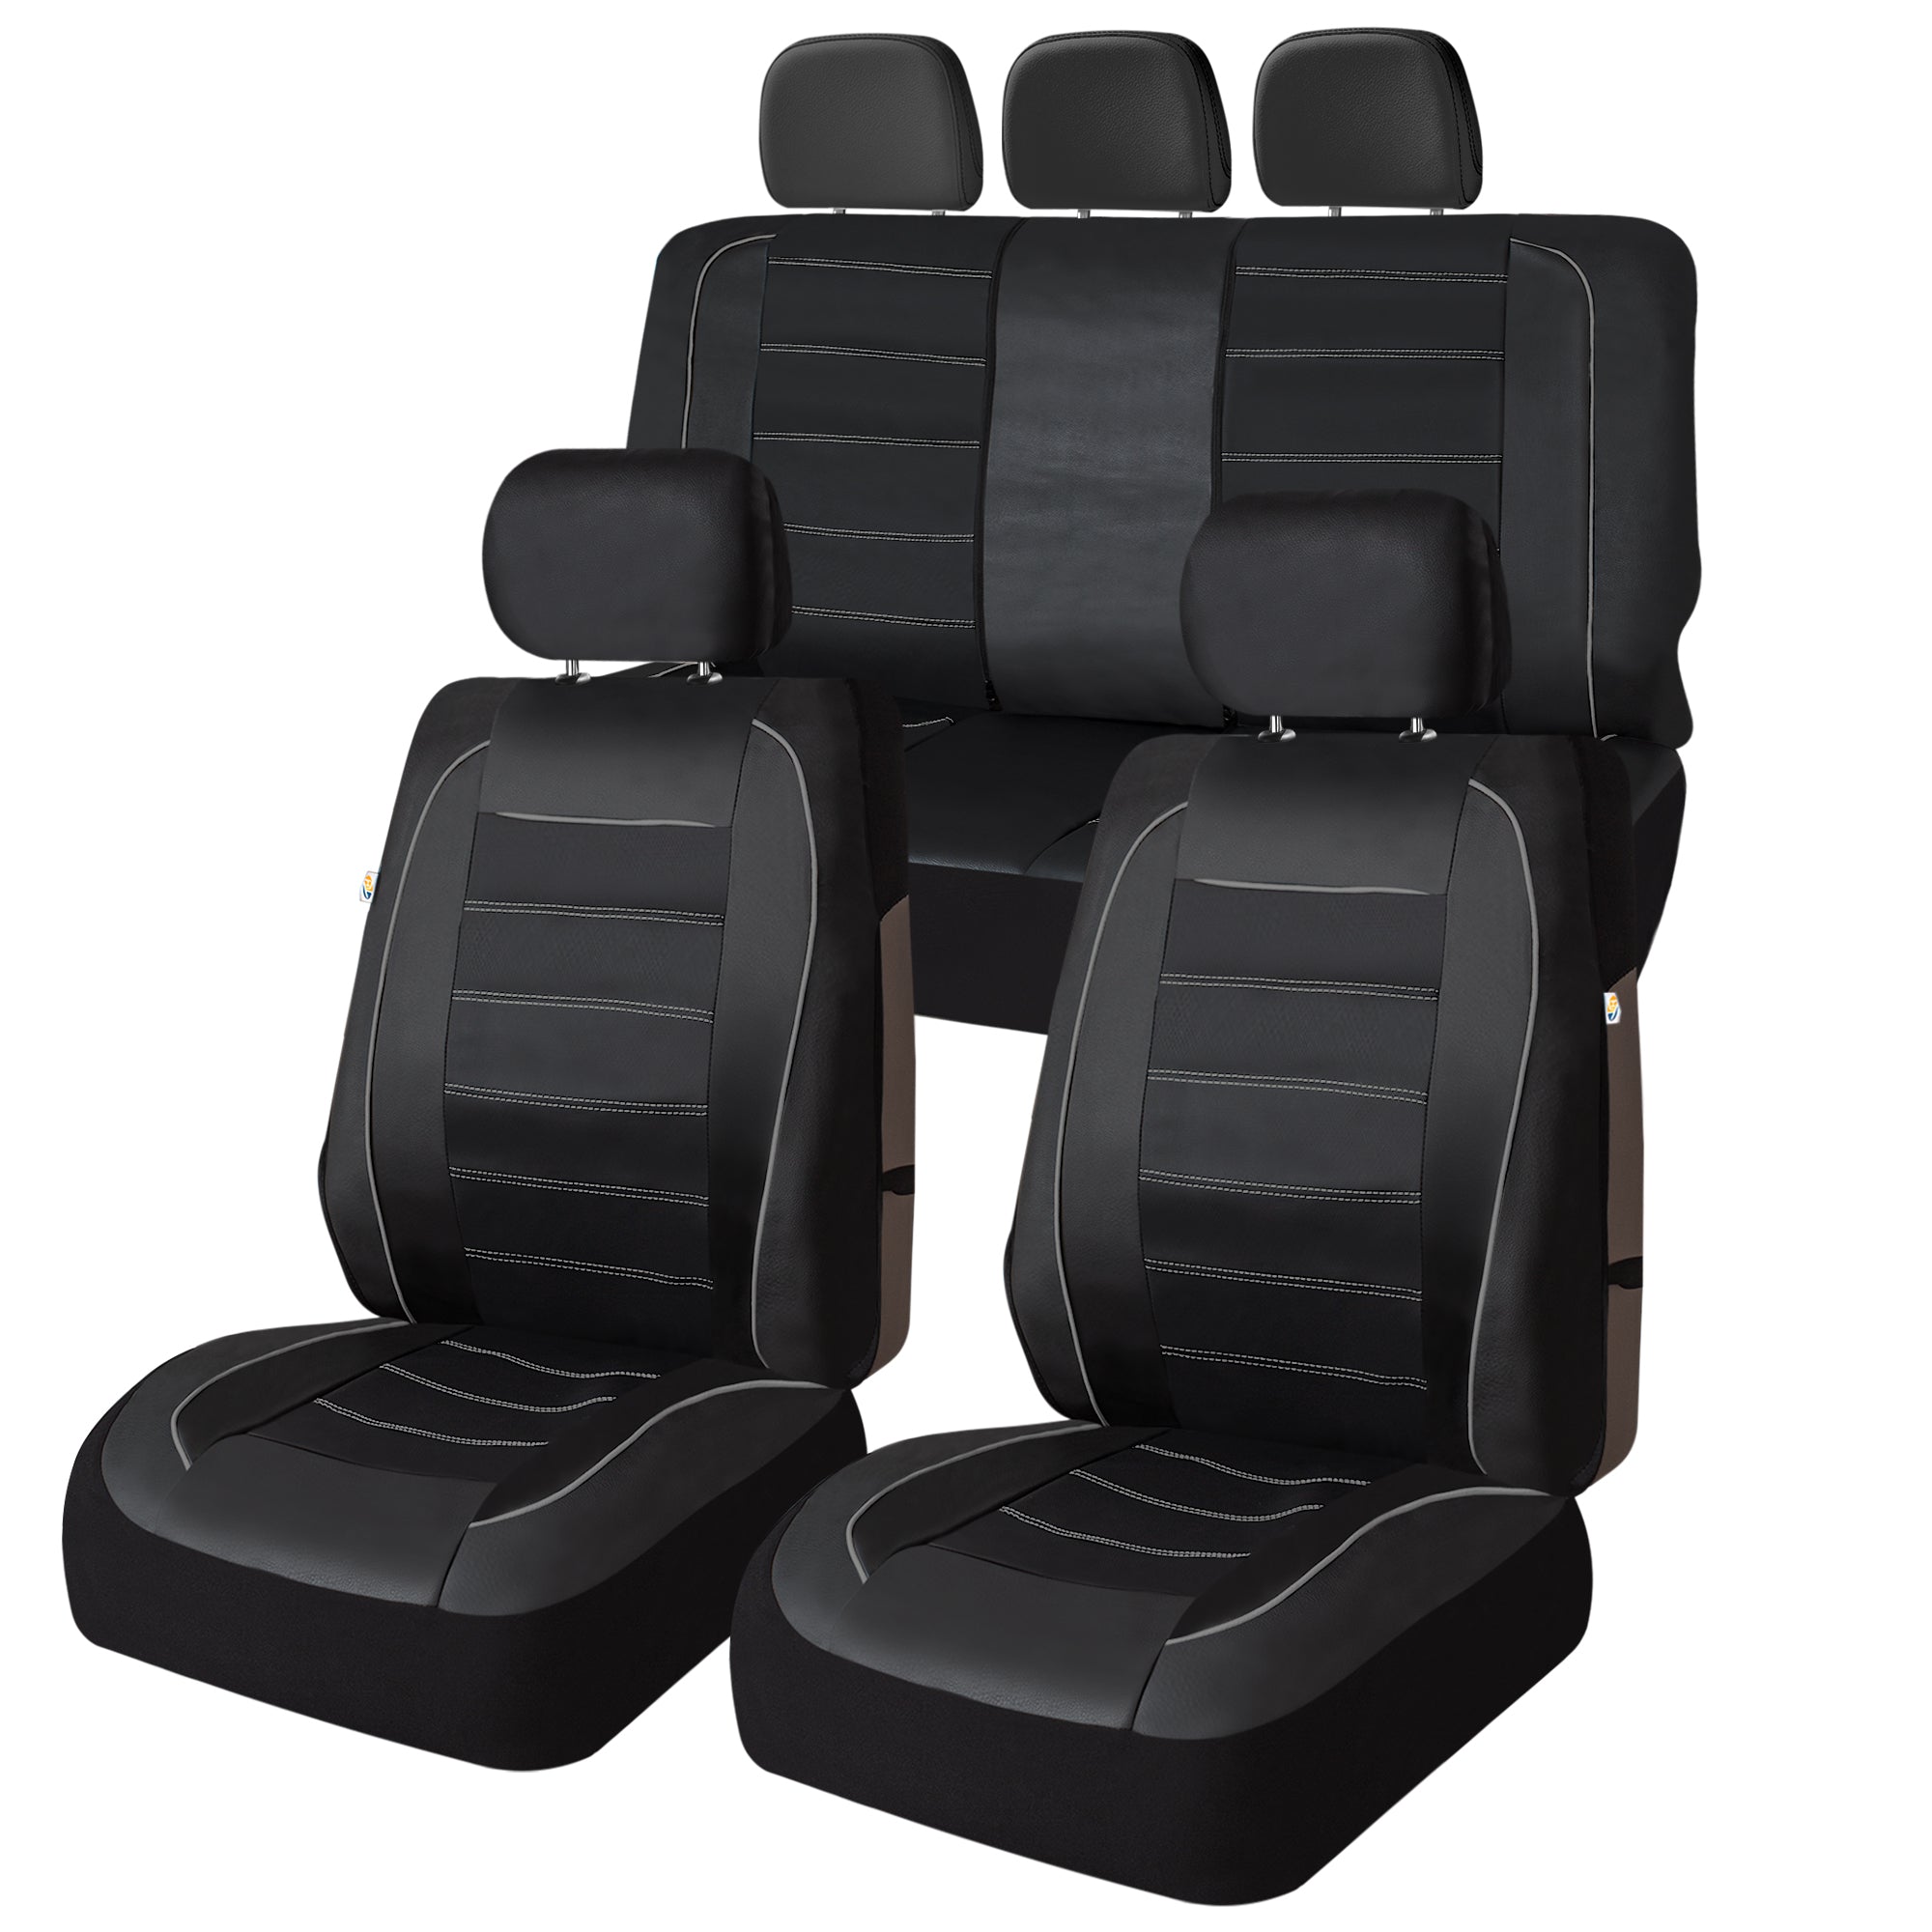 Premier Leatherette Seat Covers - Full Set - Gray